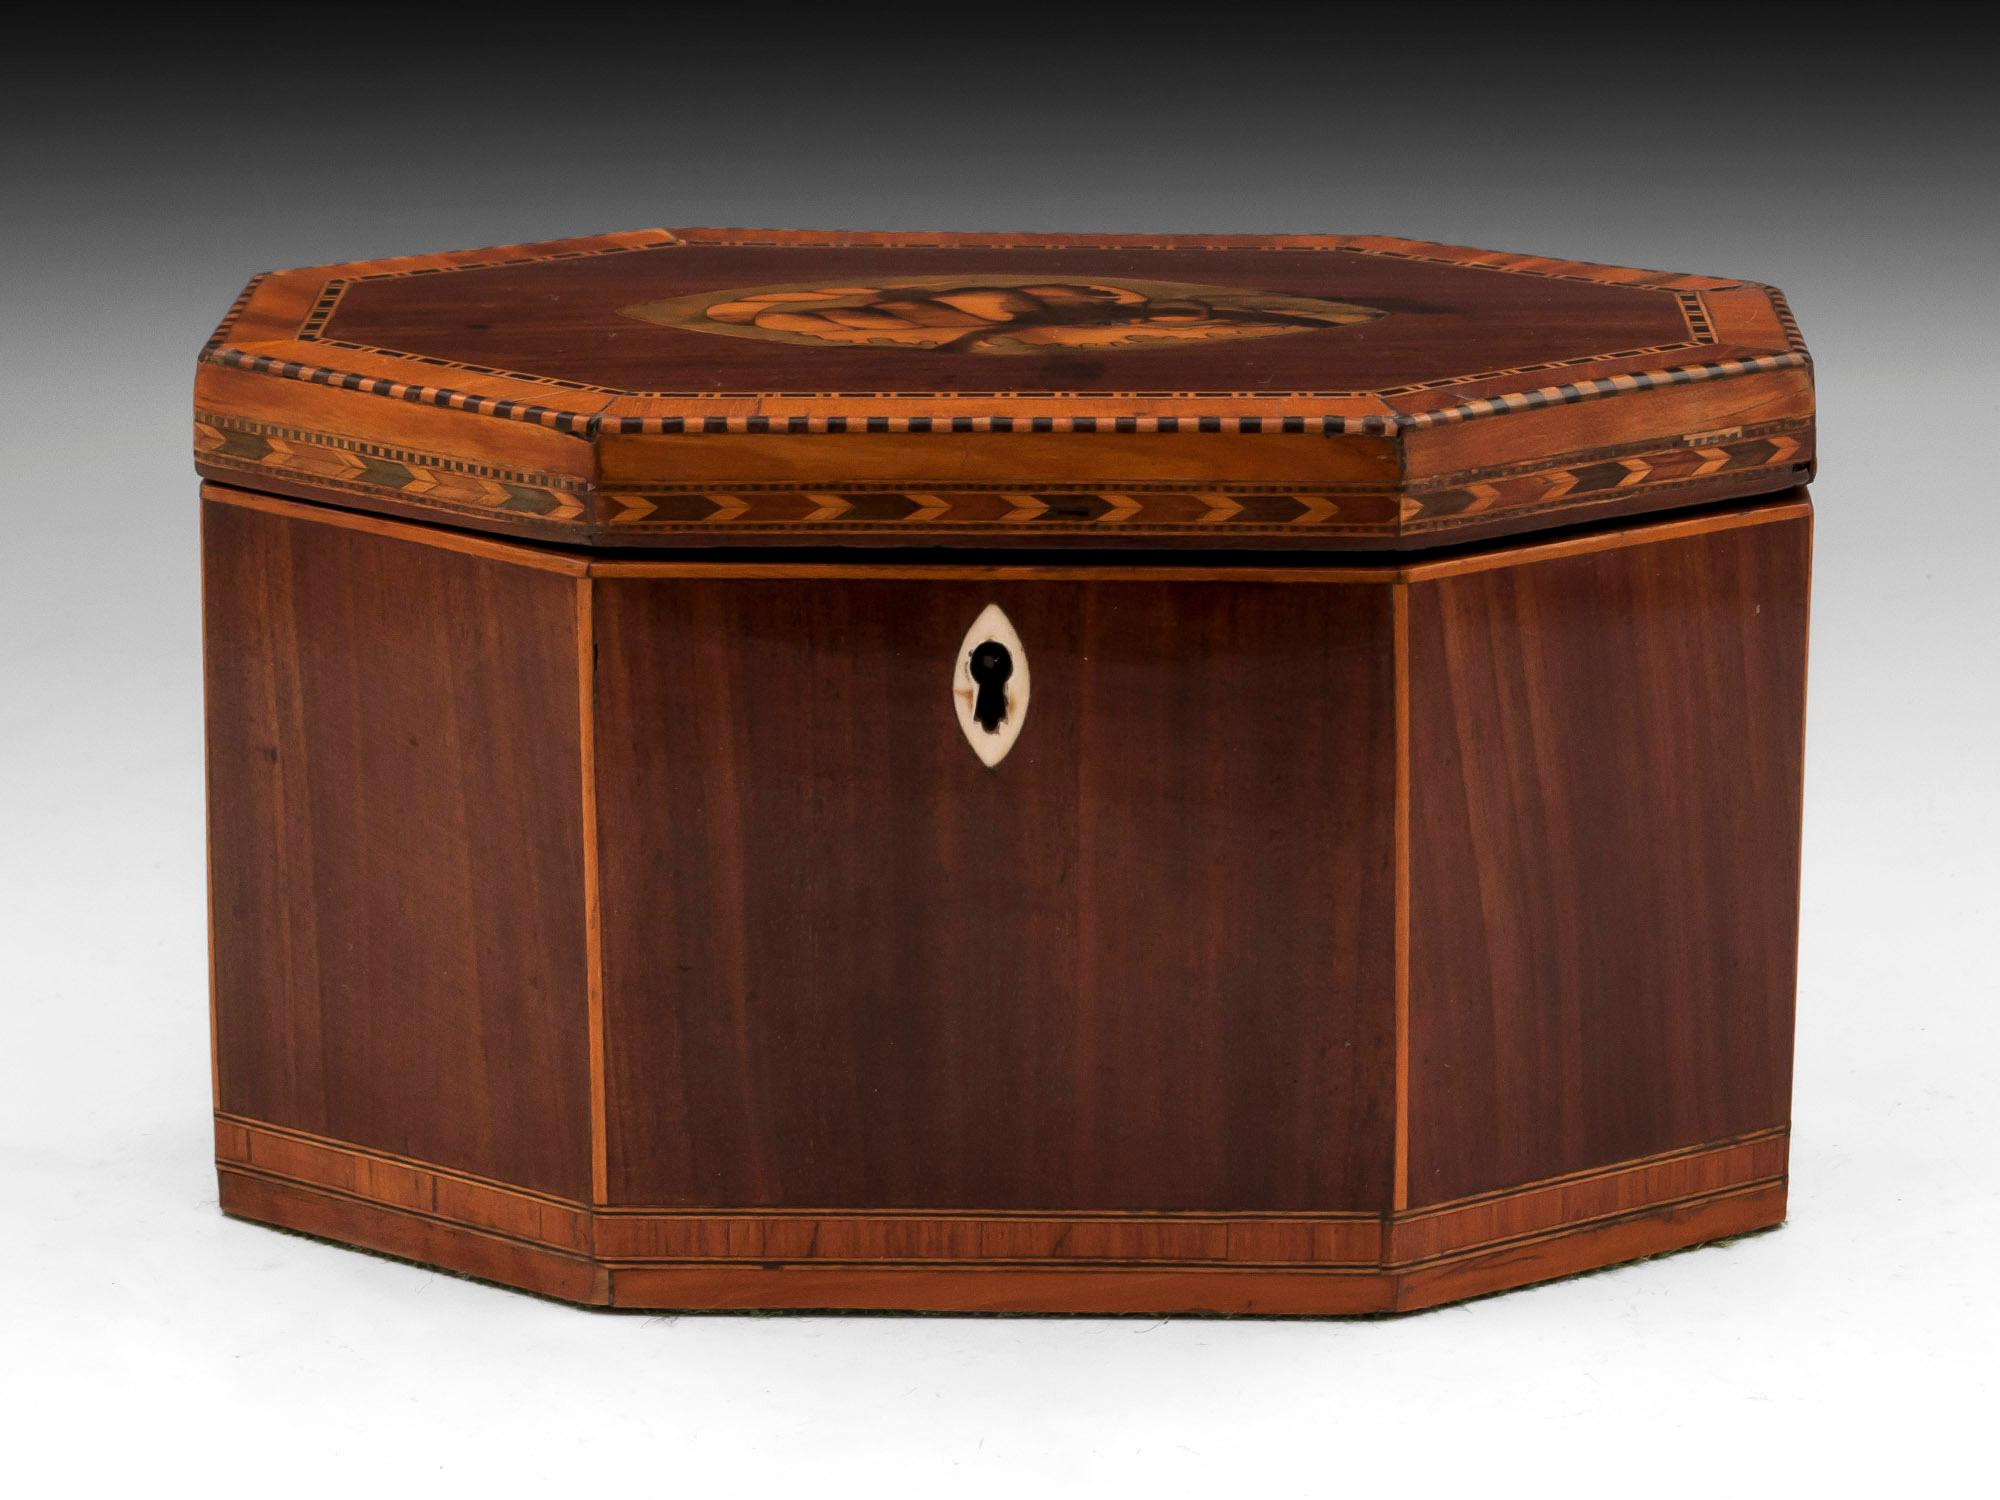 Antique Octagonal tea caddy with conch shell inlay to the top, with chequered edging with satinwood cross banding and oval shaped bone escutcheon. Surrounding the front edge is a herring bone inlay coloured boxwood inlays with the base having a